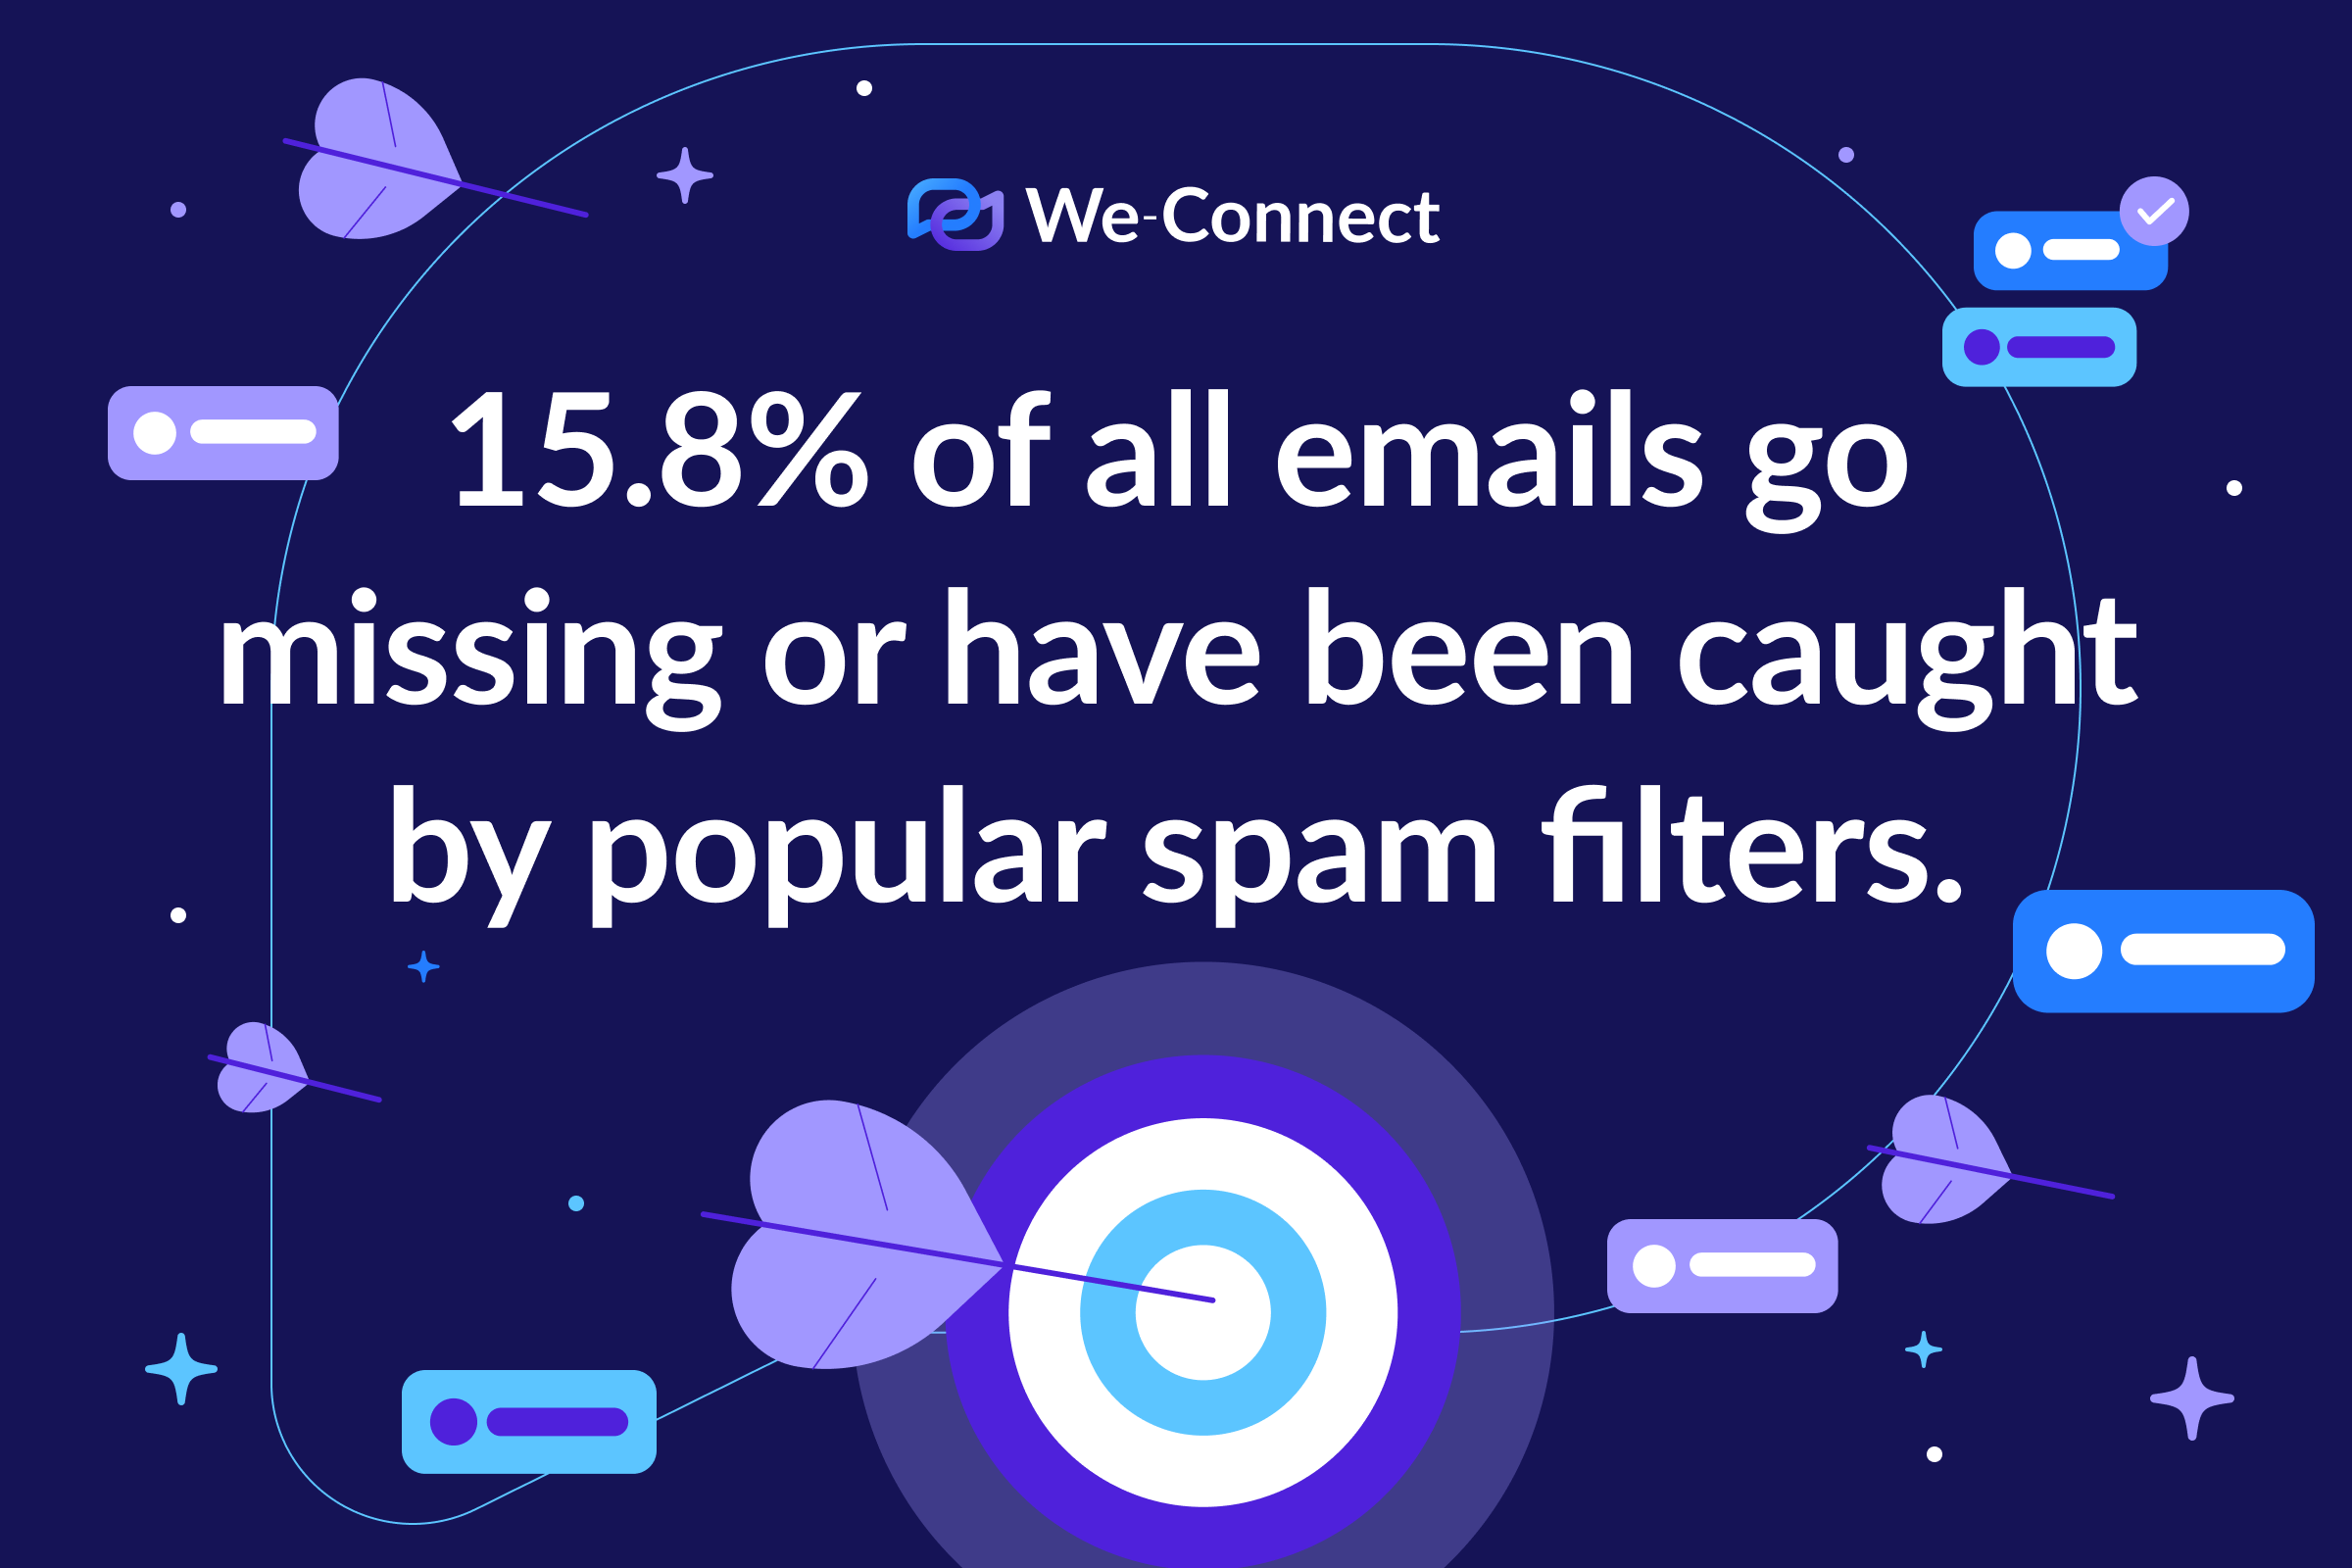 15.8% of all emails go missing or have been caught by popular spam filters.